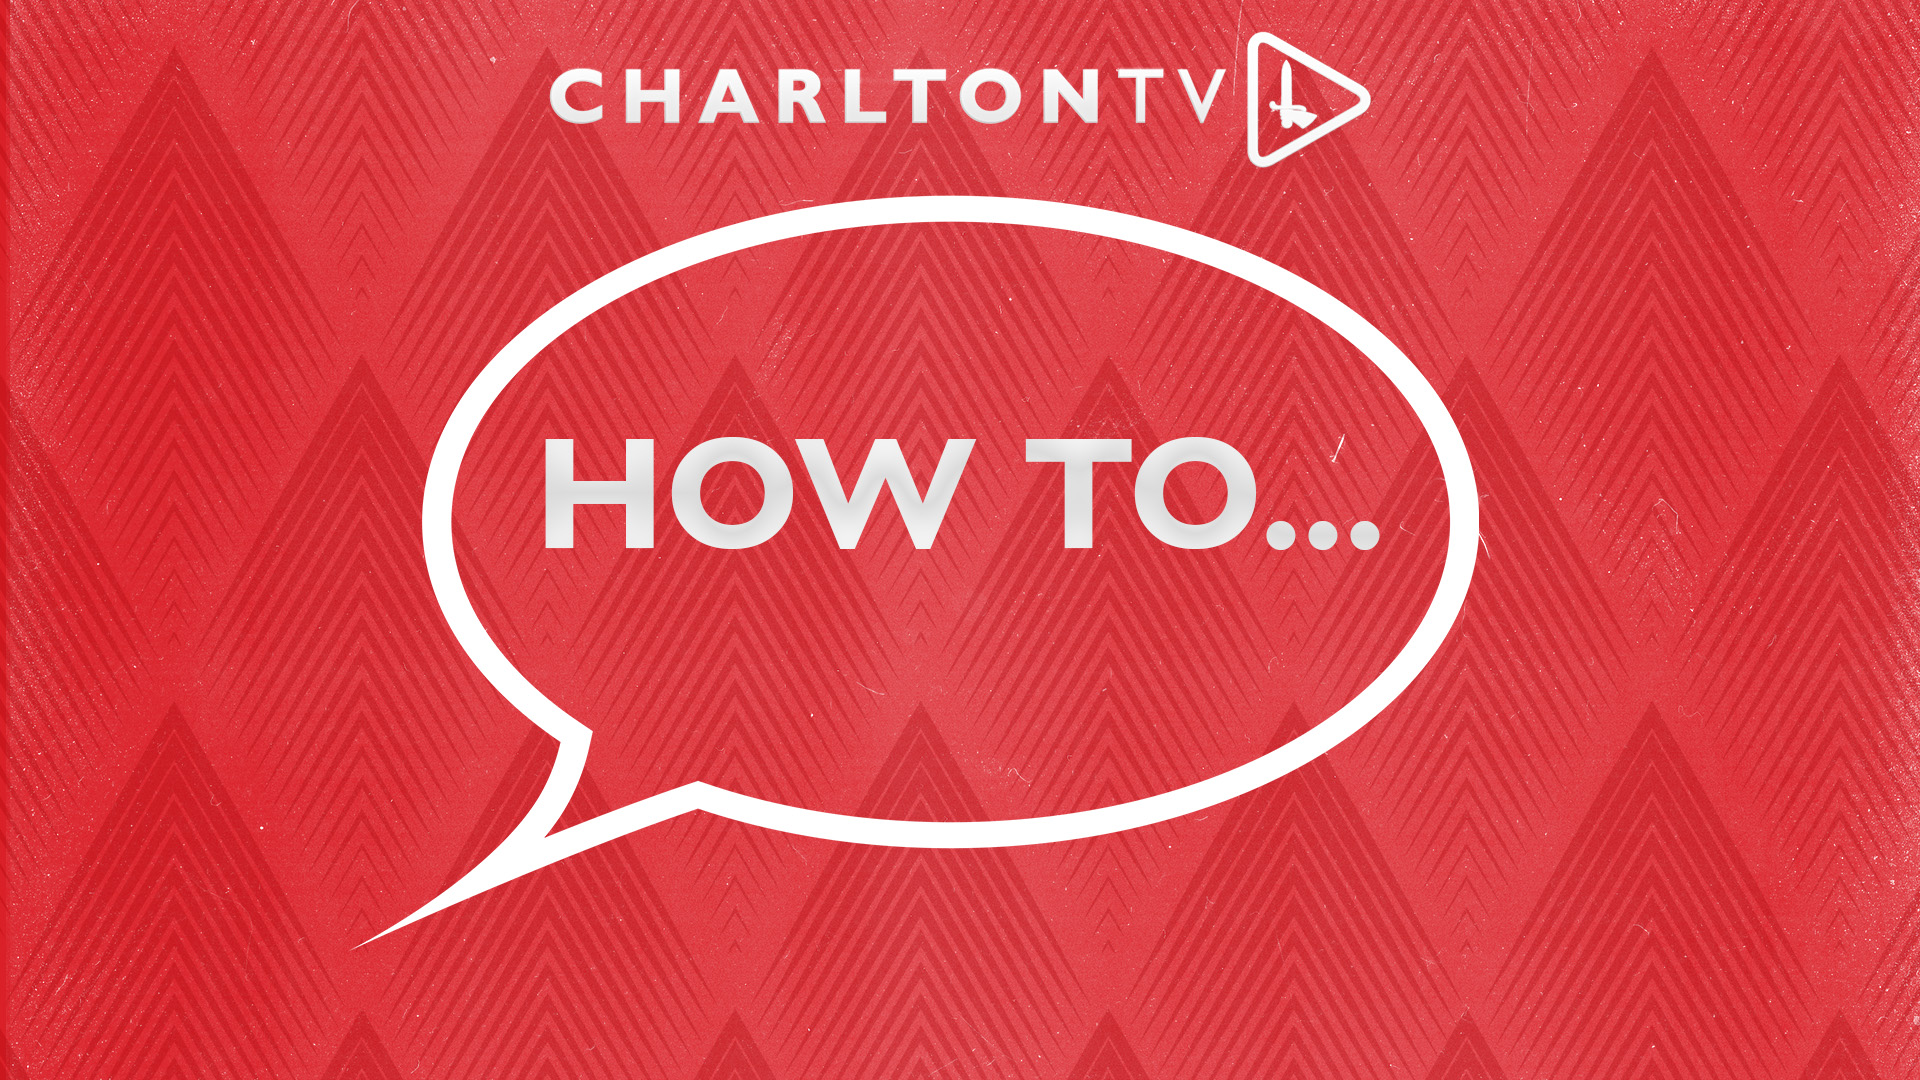 Charlton TV 'How To' graphic